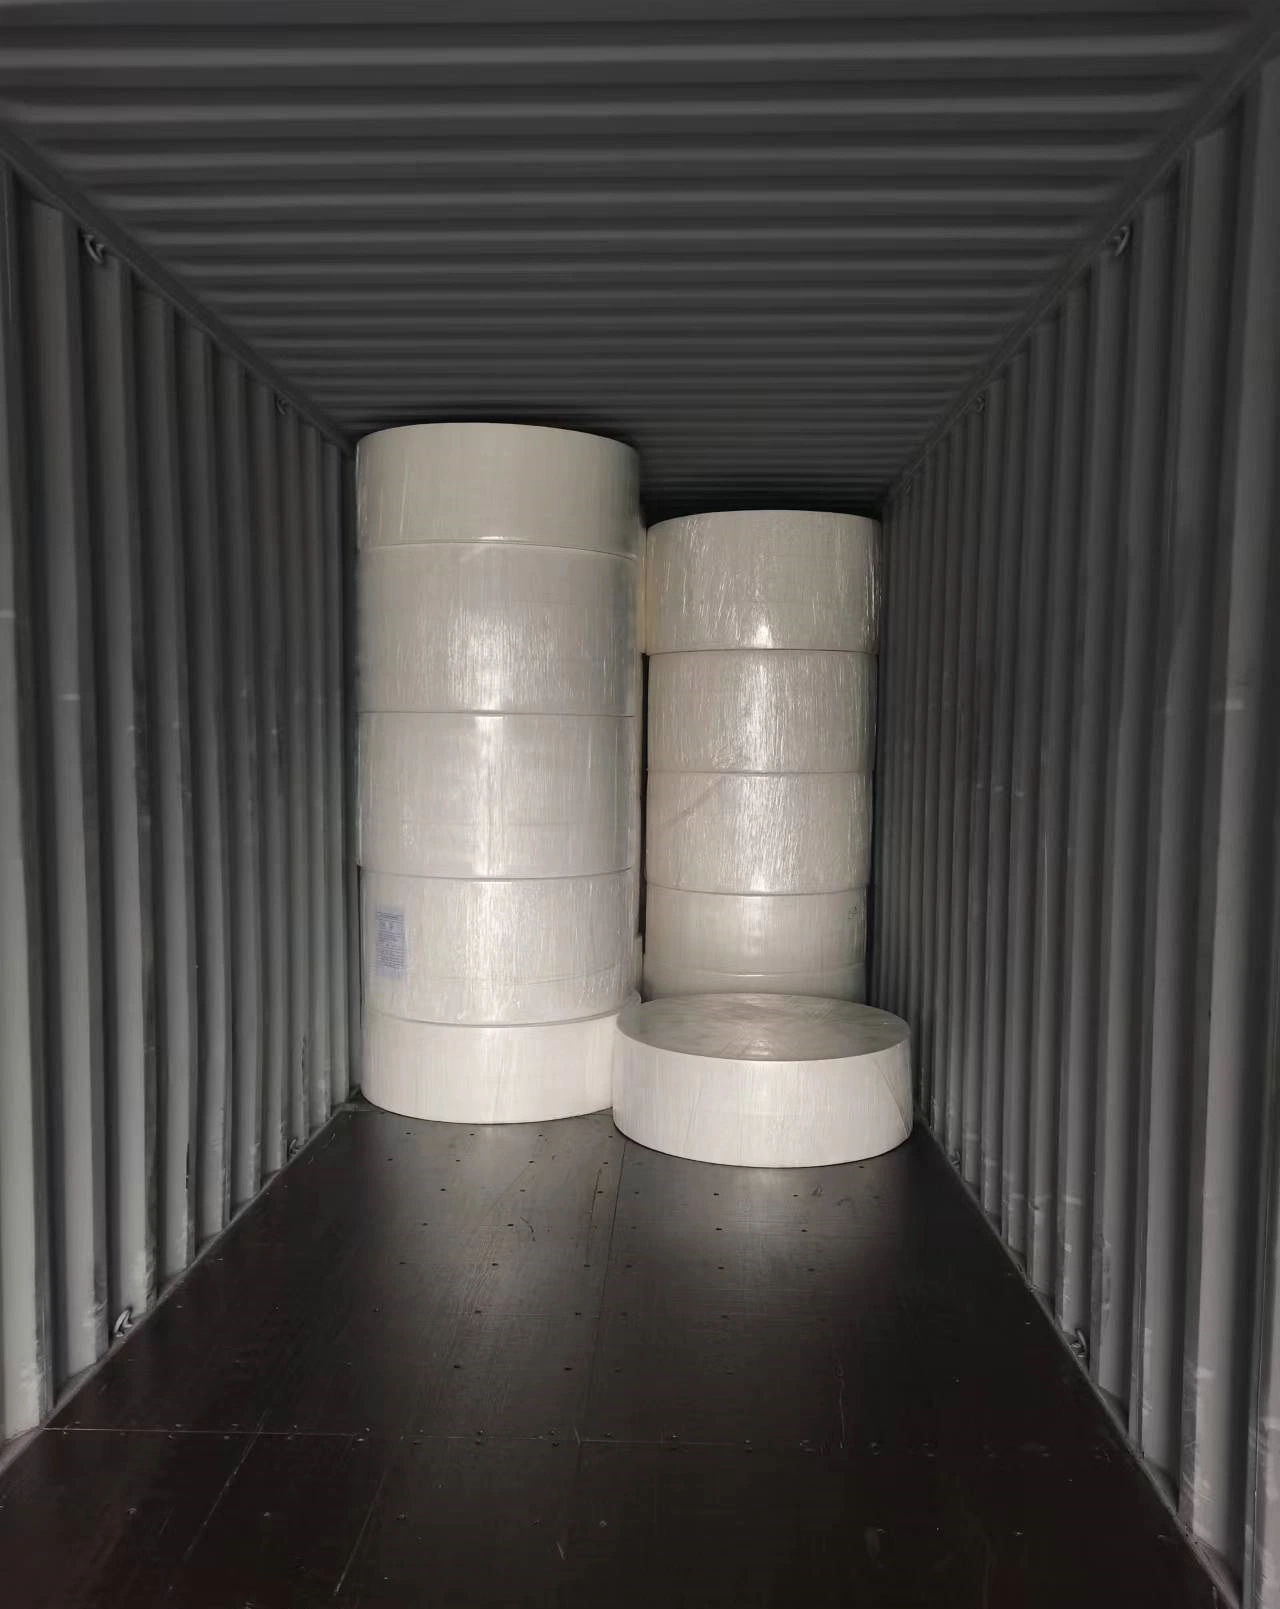 N-Facial China Materials for Making Tissue Paper Roll Jumbo Roll Toilet/Facial Paper Tissue